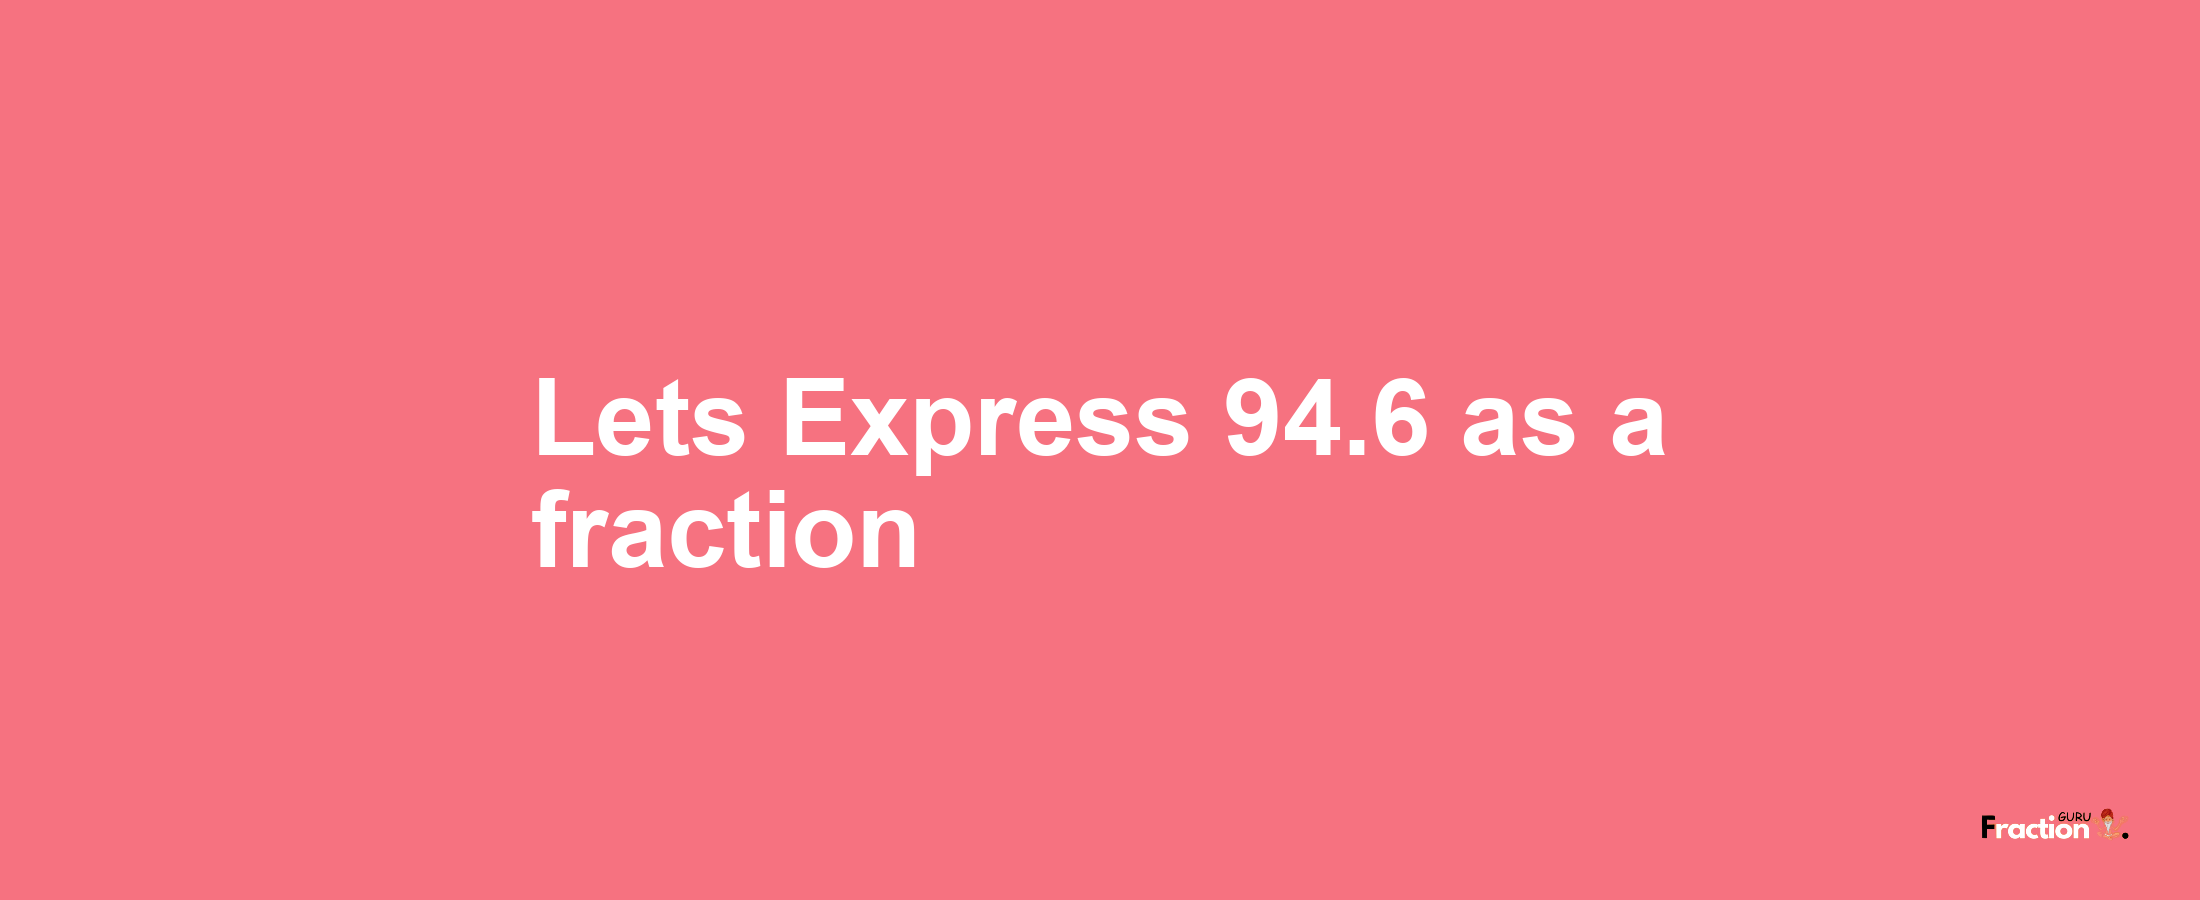 Lets Express 94.6 as afraction